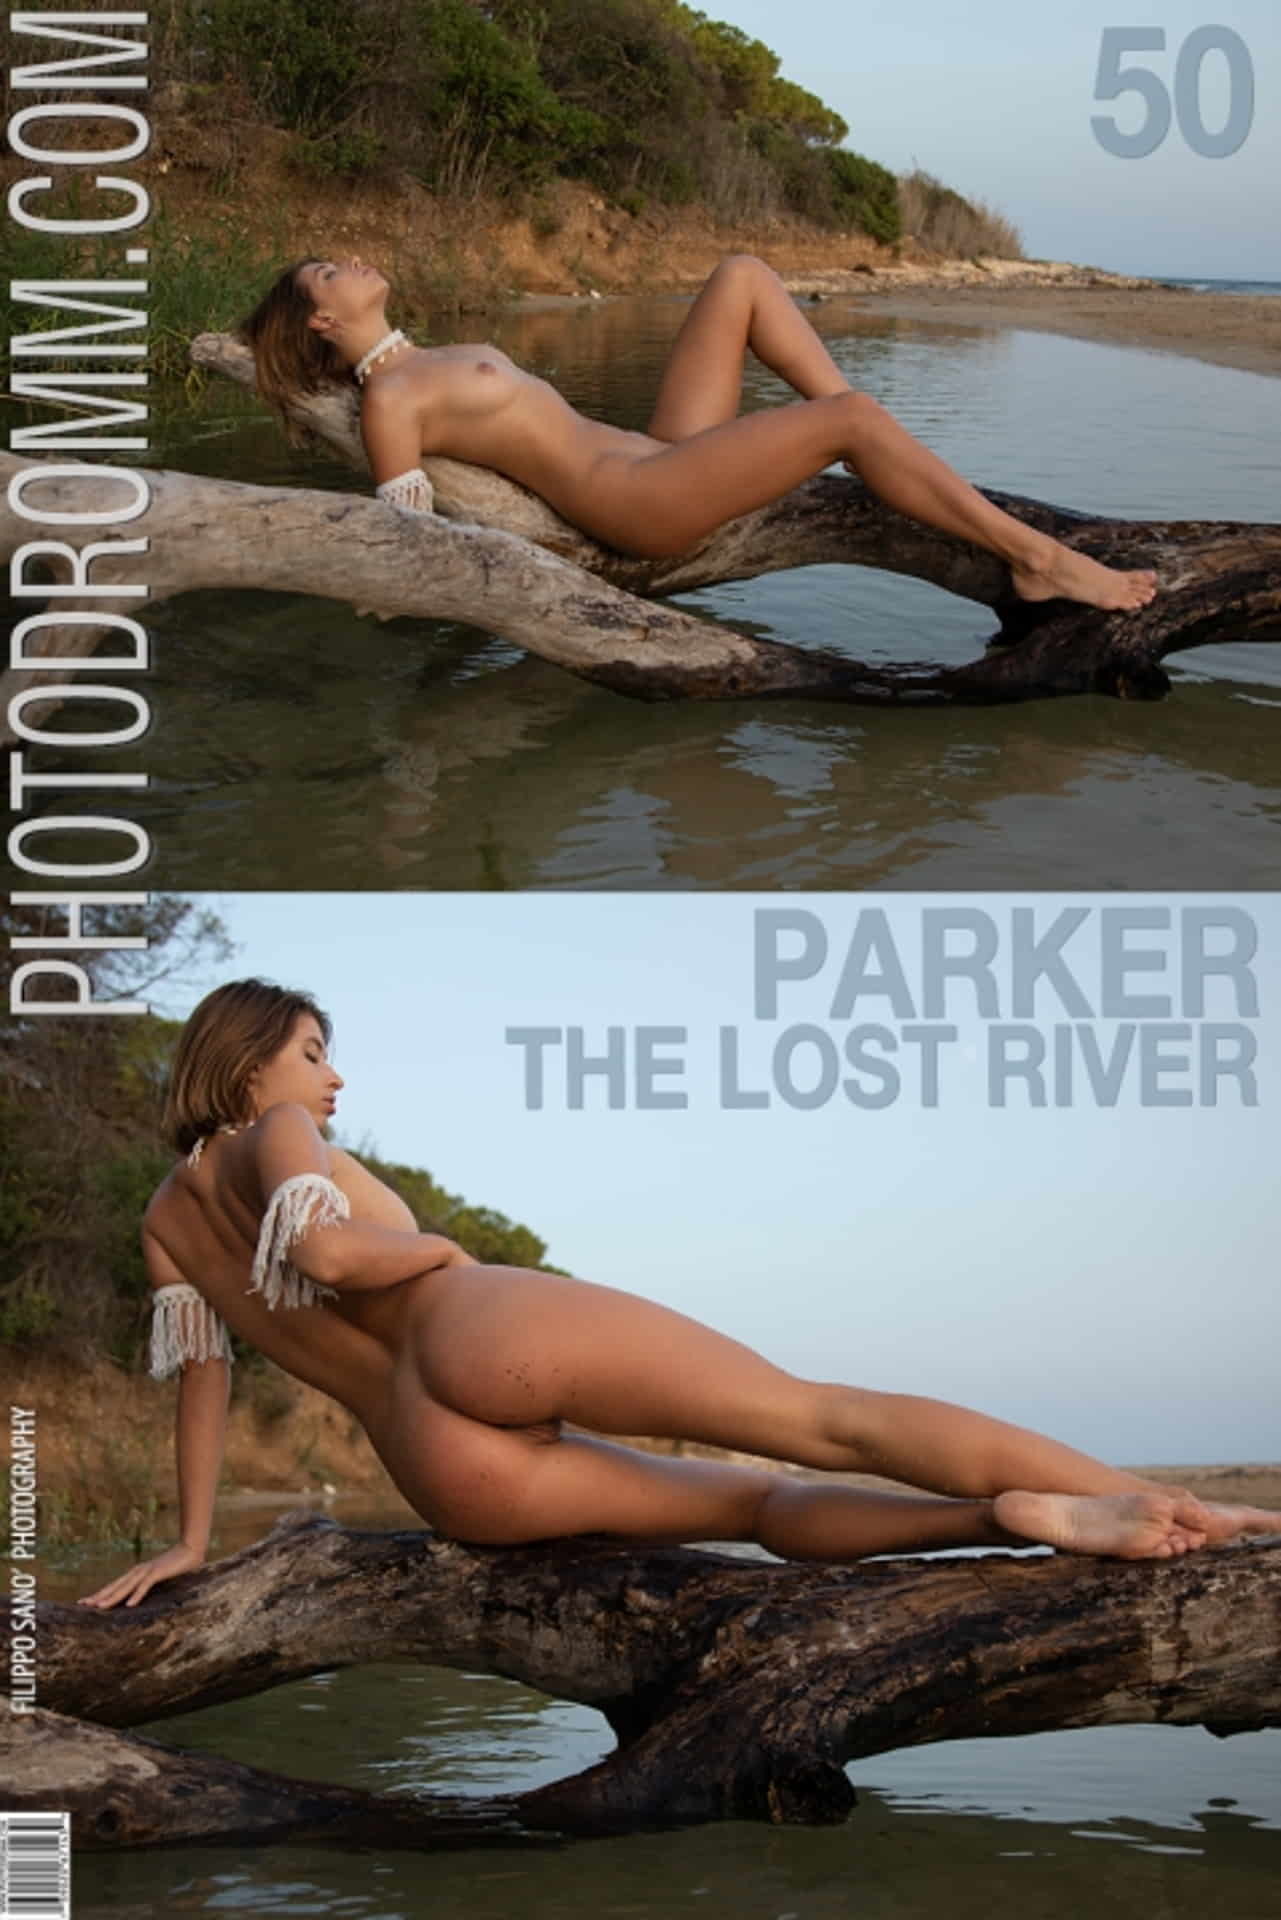 The lost river or the lost girl——parker_the lost river